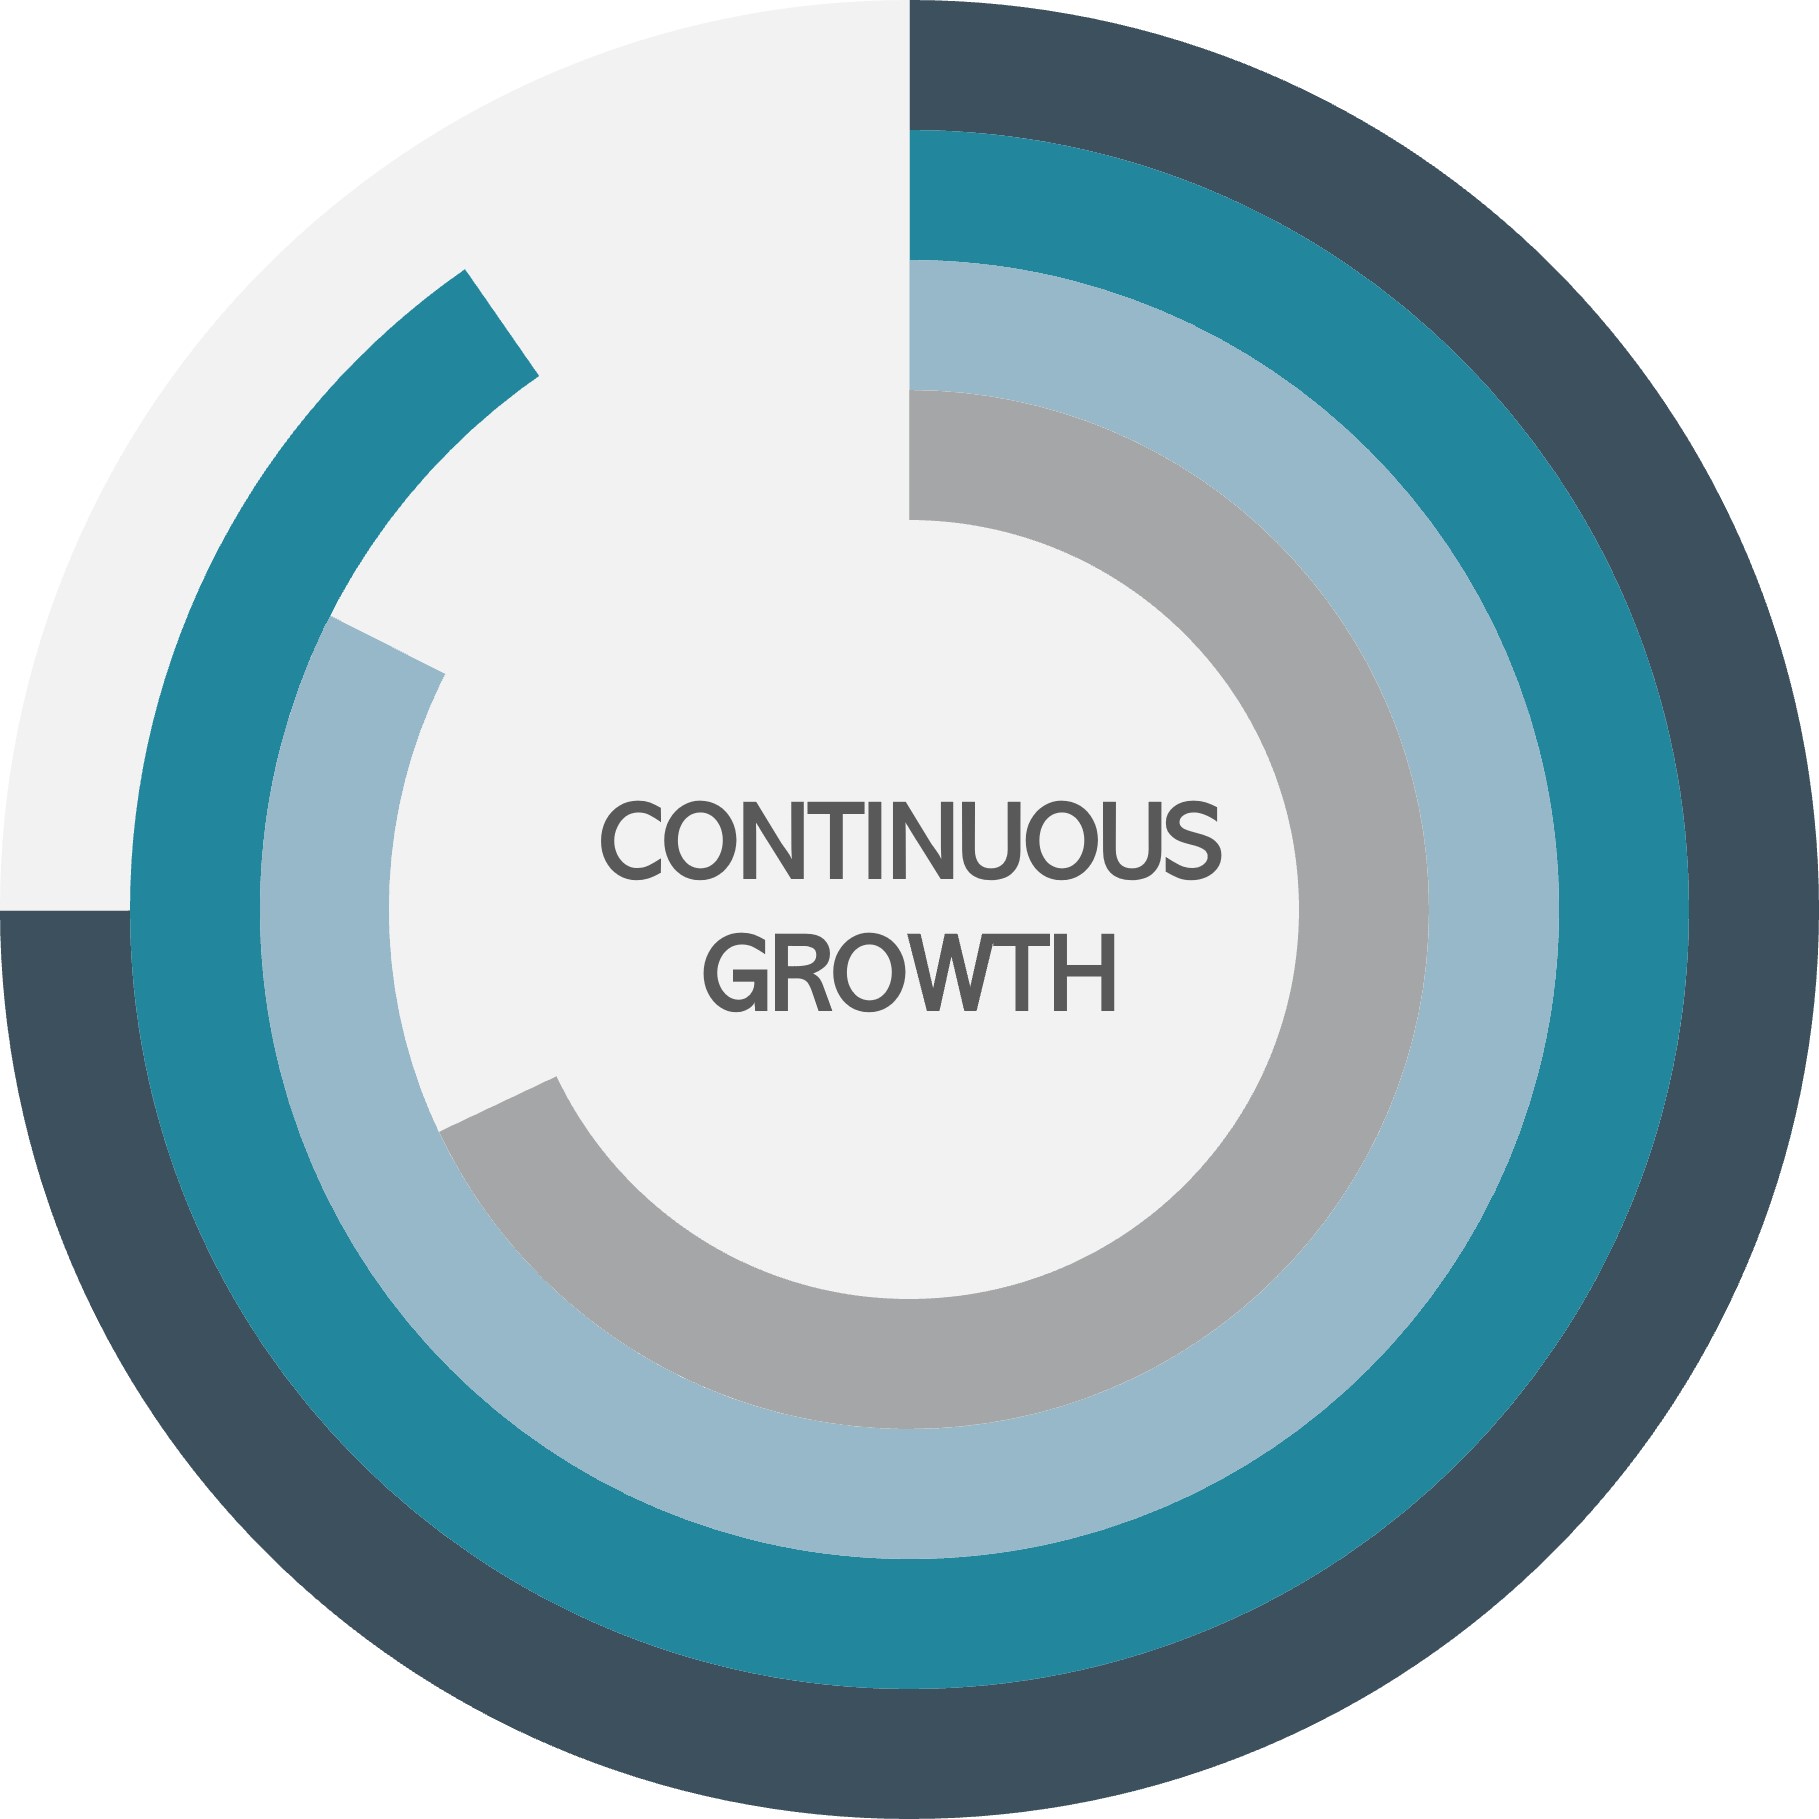 A multi-dimensional approach to continuous growth